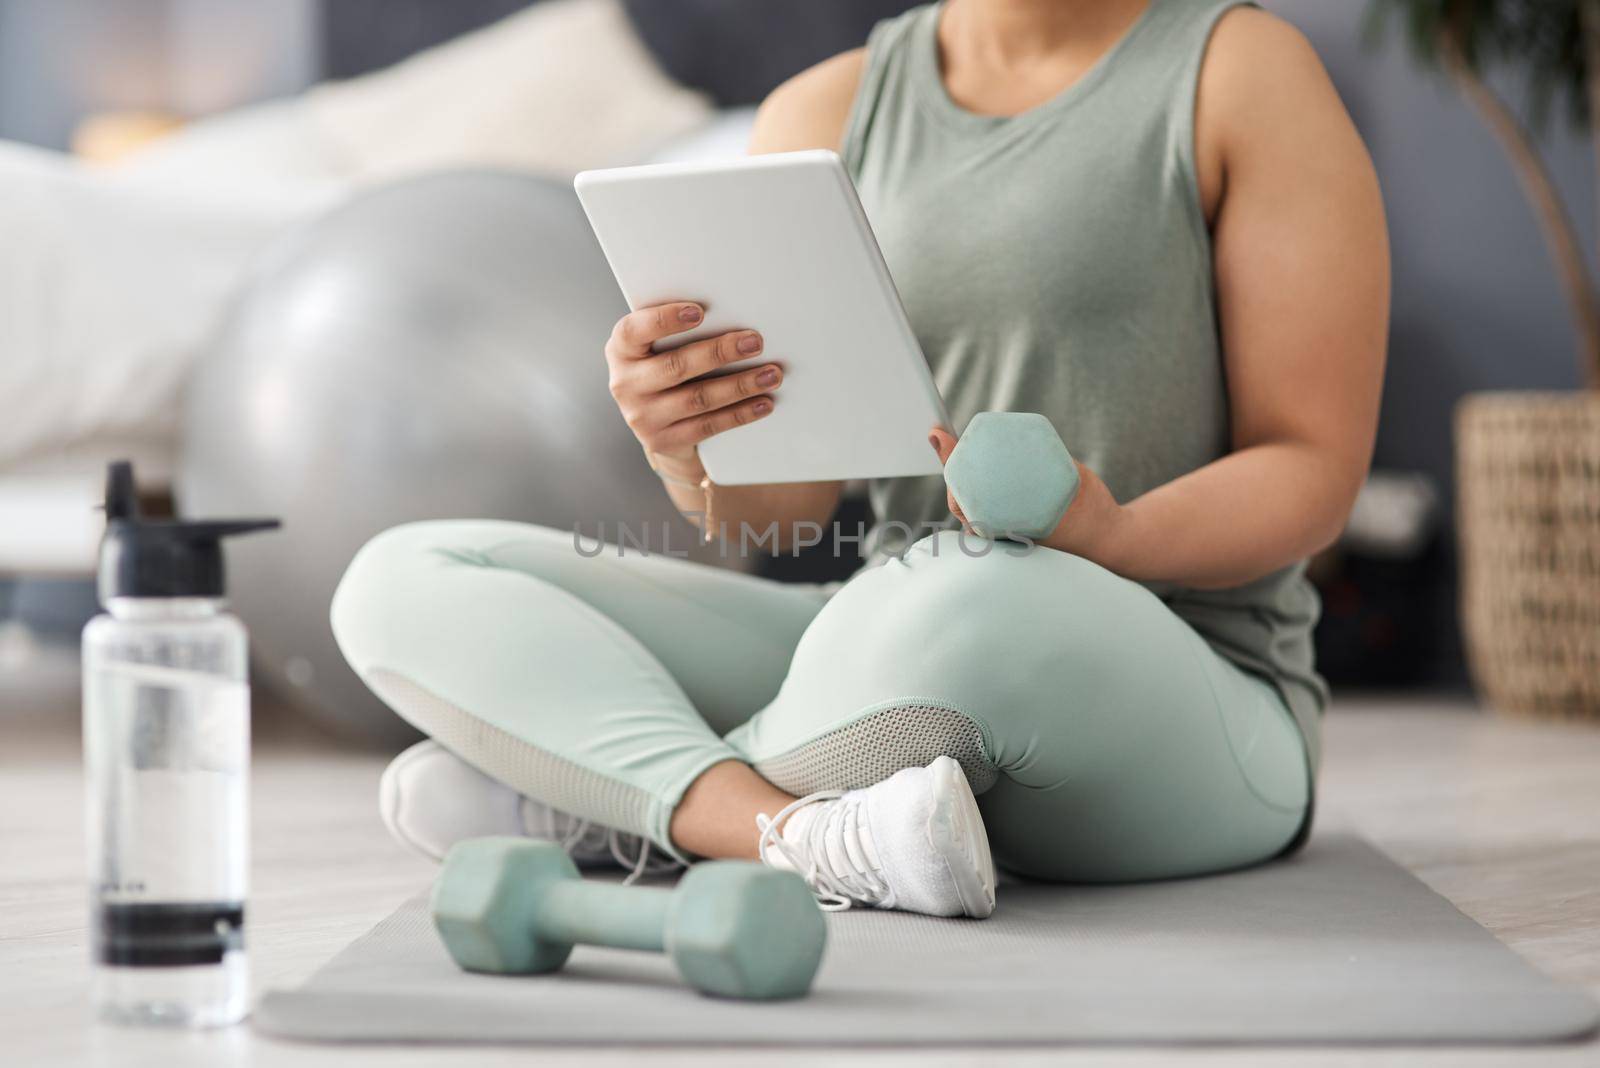 Closeup shot of an unrecognisable woman using a digital tablet while exercising at home.